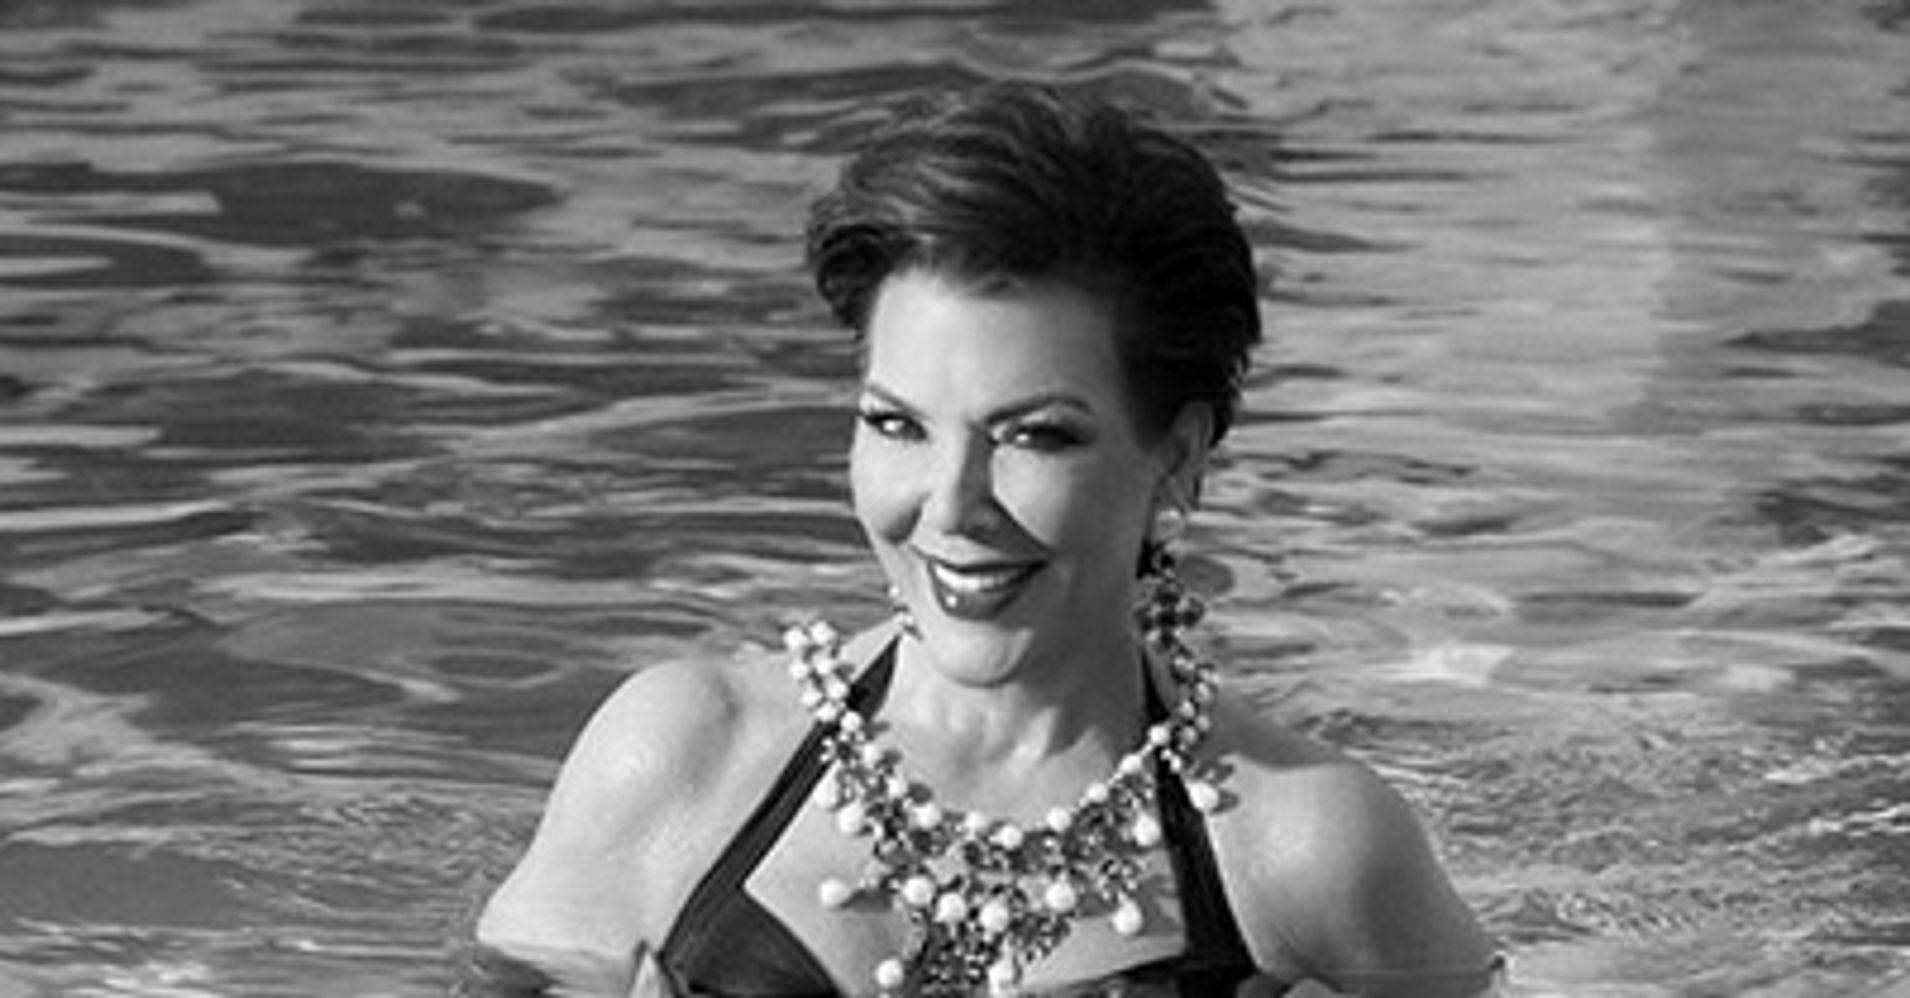 Kris Jenner Is Sexy At 60 As She Poses In Swimsuit For Love Magazine Photo Shoot Huffpost